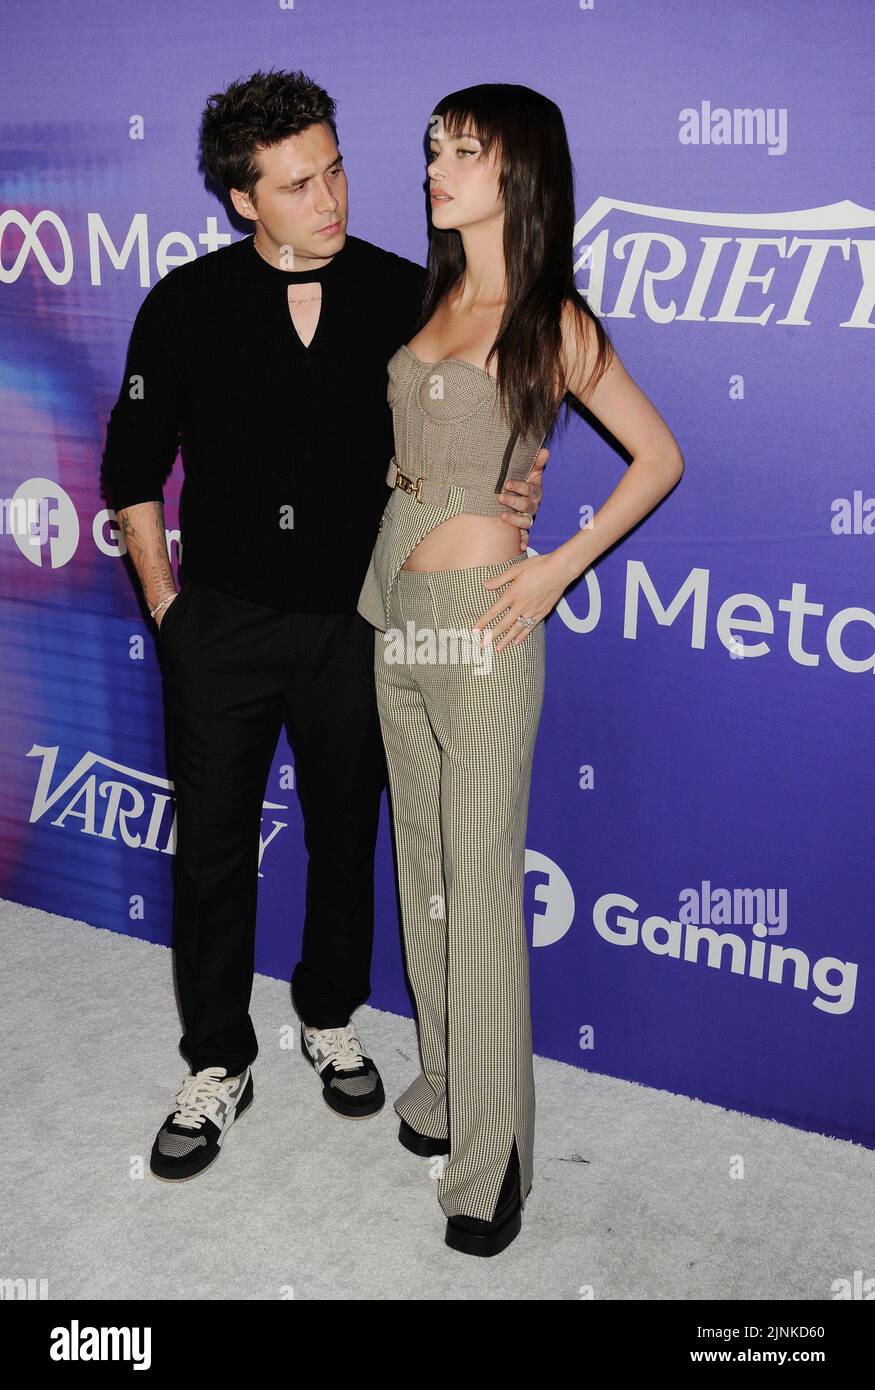 HOLLYWOOD, CA - AUGUST 11: (L-R) Brooklyn Peltz Beckham and Nicola Peltz Beckham attend Variety's 2022 Power Of Young Hollywood Celebration Presented By Facebook Gaming at NeueHouse Hollywood on August 11, 2022 in Los Angeles, California. Credit Jeffrey Mayer/JTMPhotos/MediaPunch Stock Photo